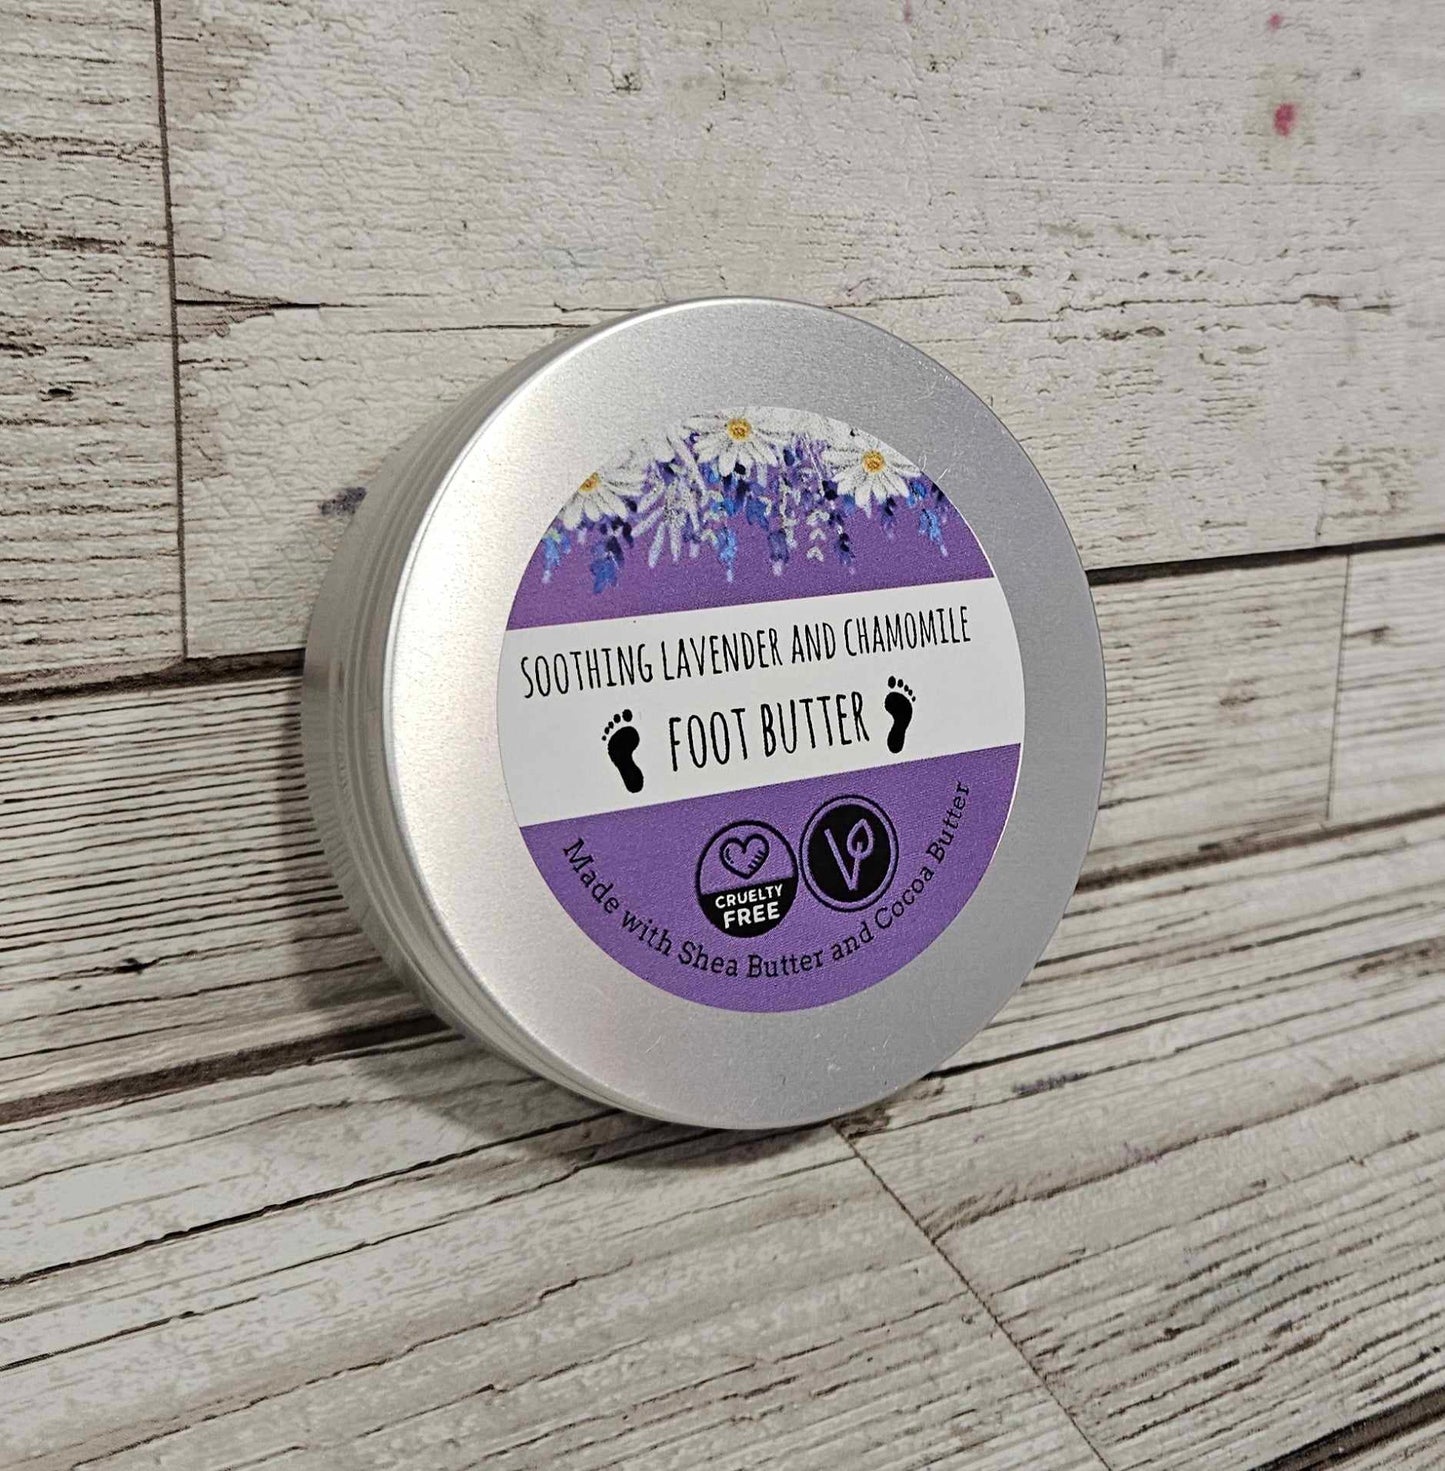 'Soothing Lavender and Chamomile' Foot Butter